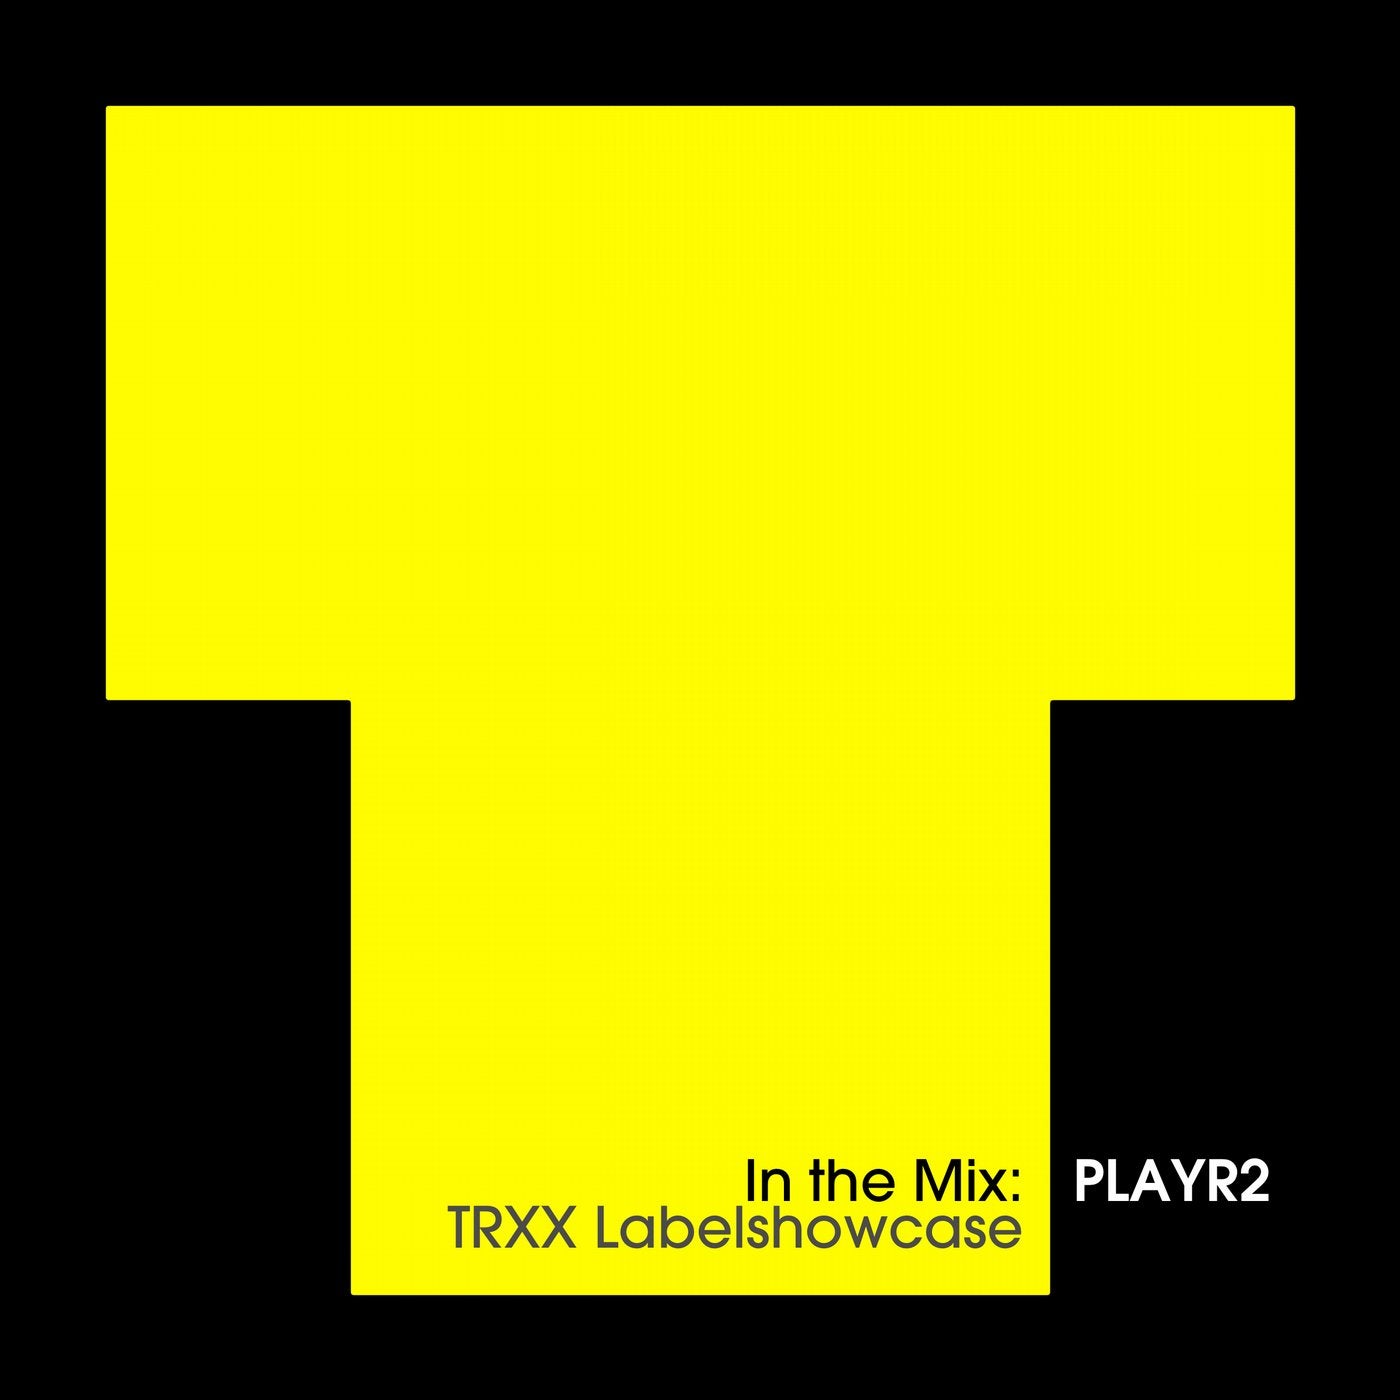 In The Mix: PLAYR2 - TRXX Labelshowcase